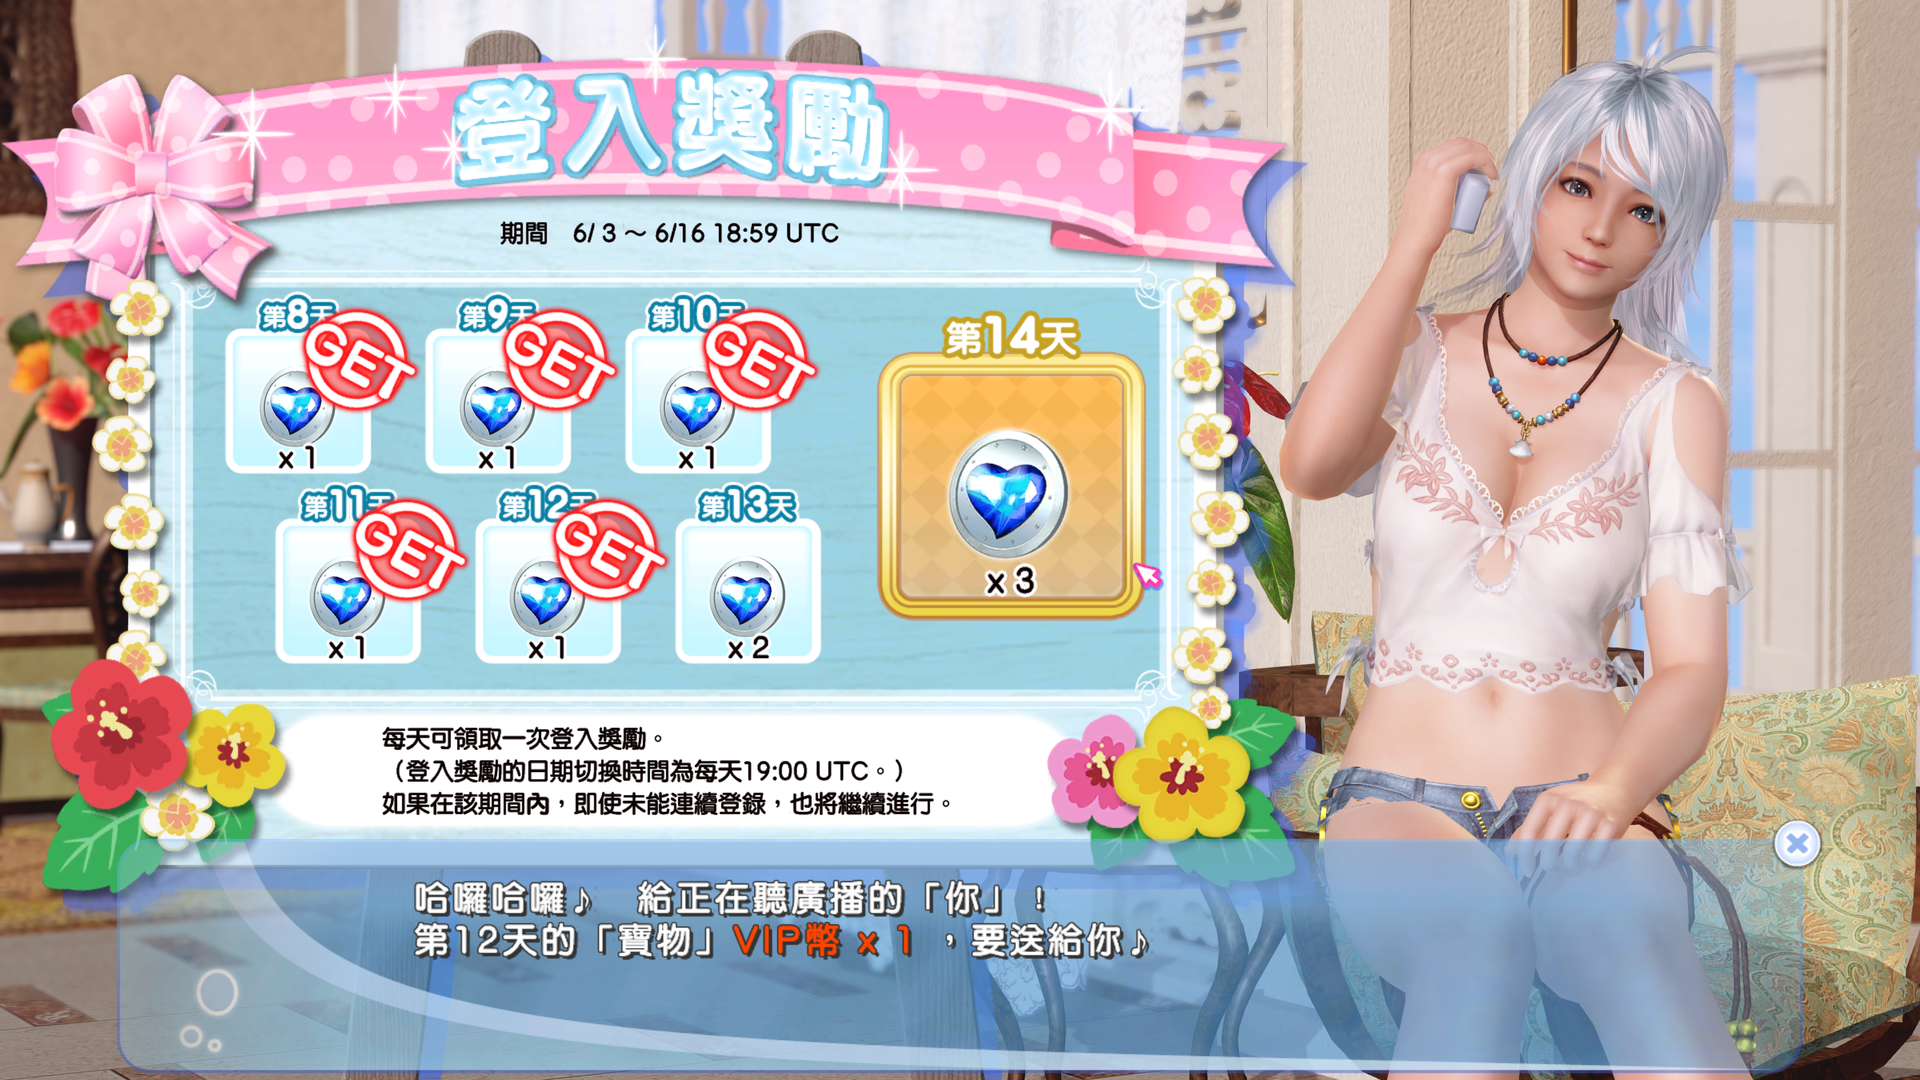 DEAD OR ALIVE Xtreme Venus Vacation Screenshot 2021.06.14 - 12.41.28.70.png